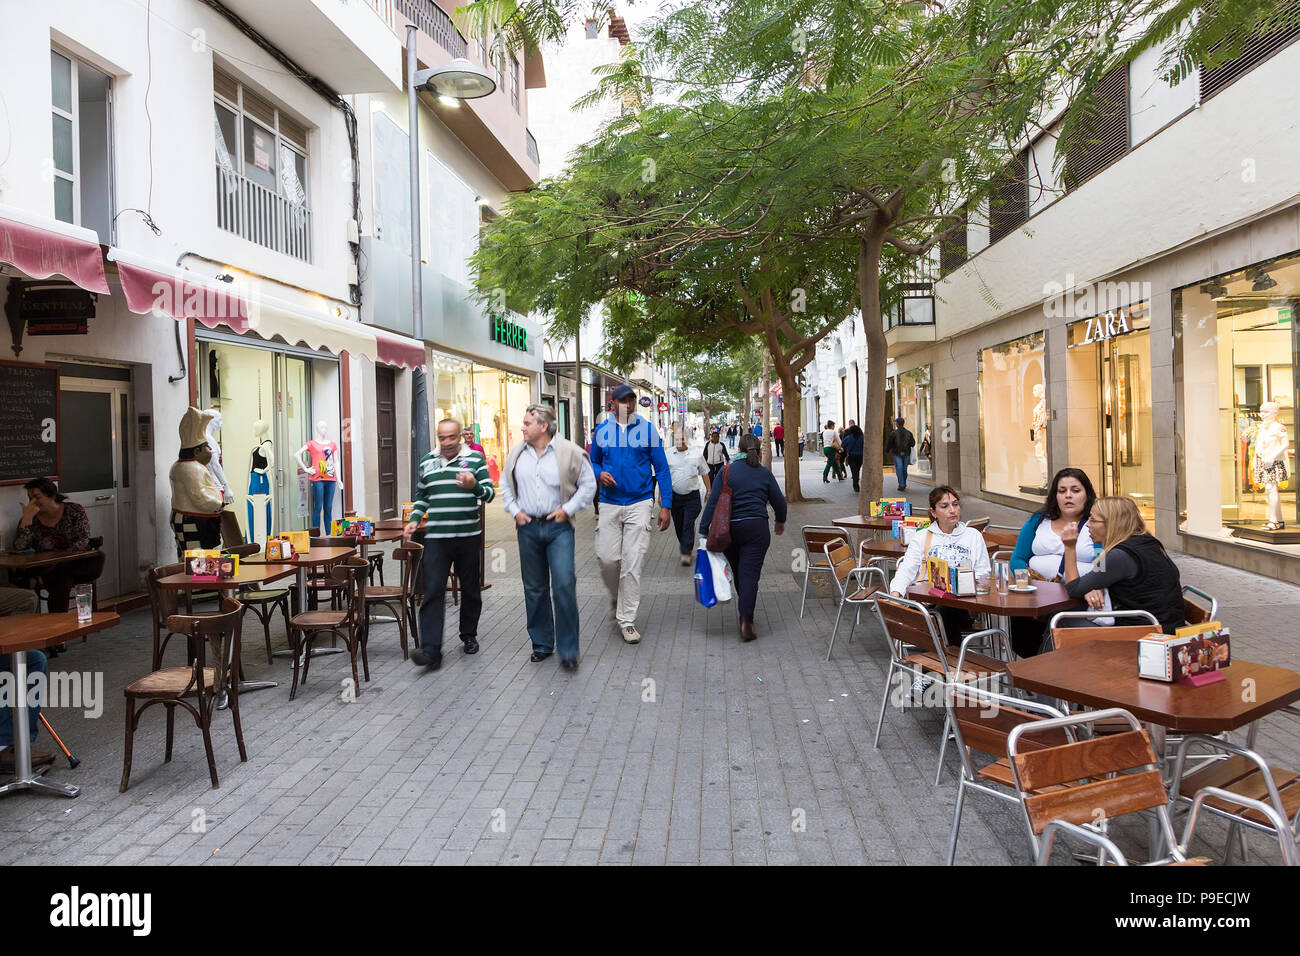 Shopping In Canary Islands High Resolution Stock Photography and Images -  Alamy